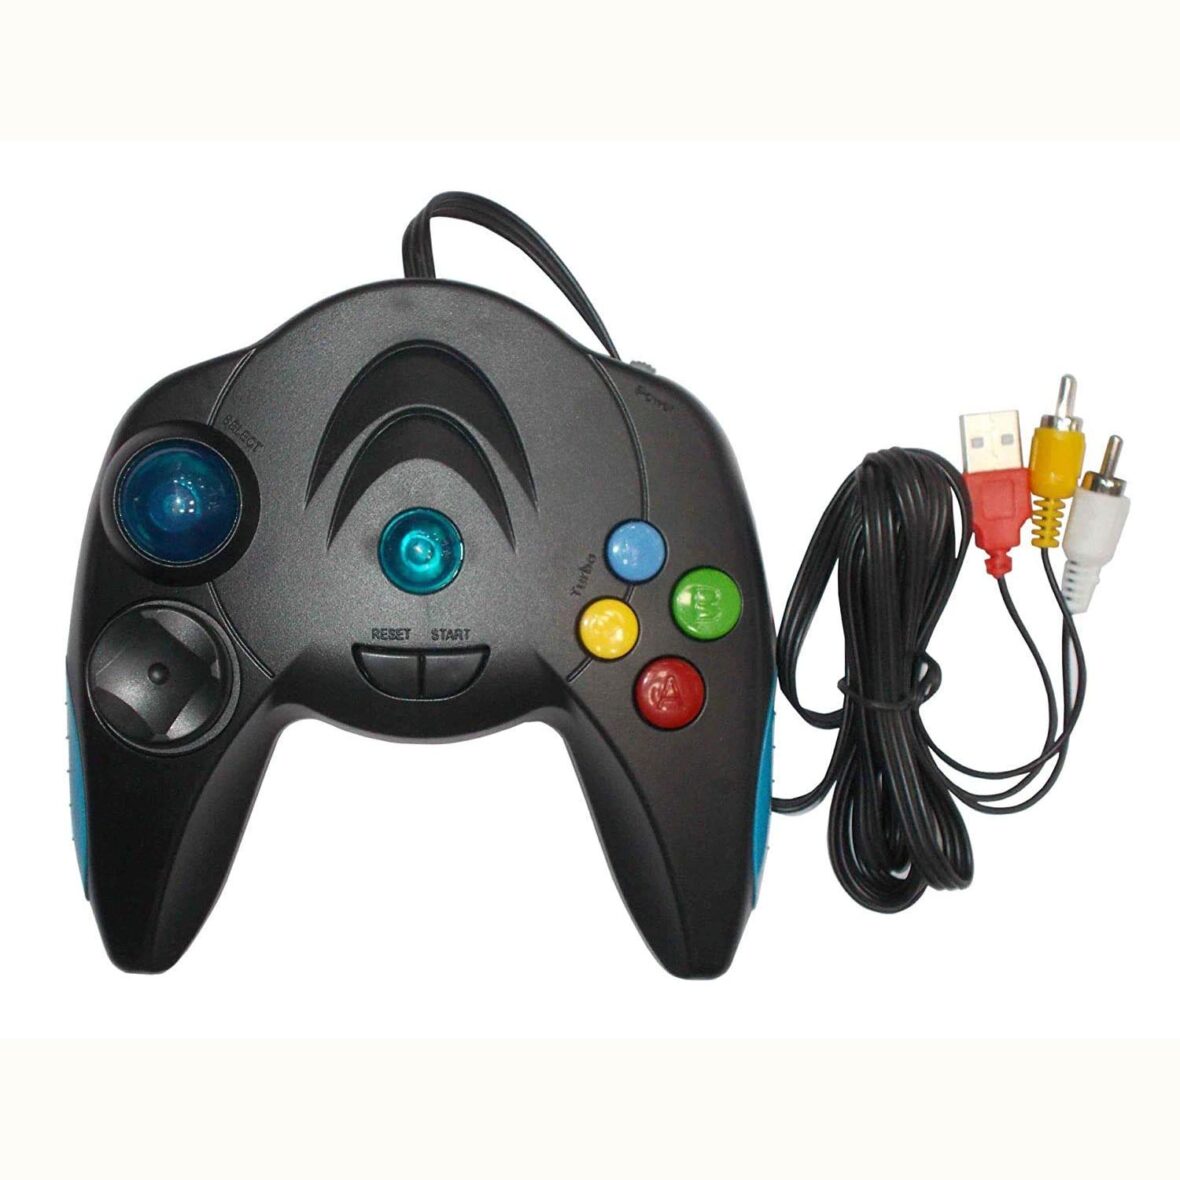 Advance Plug N Play Model No AD-2521 Video Games – Combat + Shooting + Sports + Racing with Action + Puzzles & More (Black) – Replayed Game